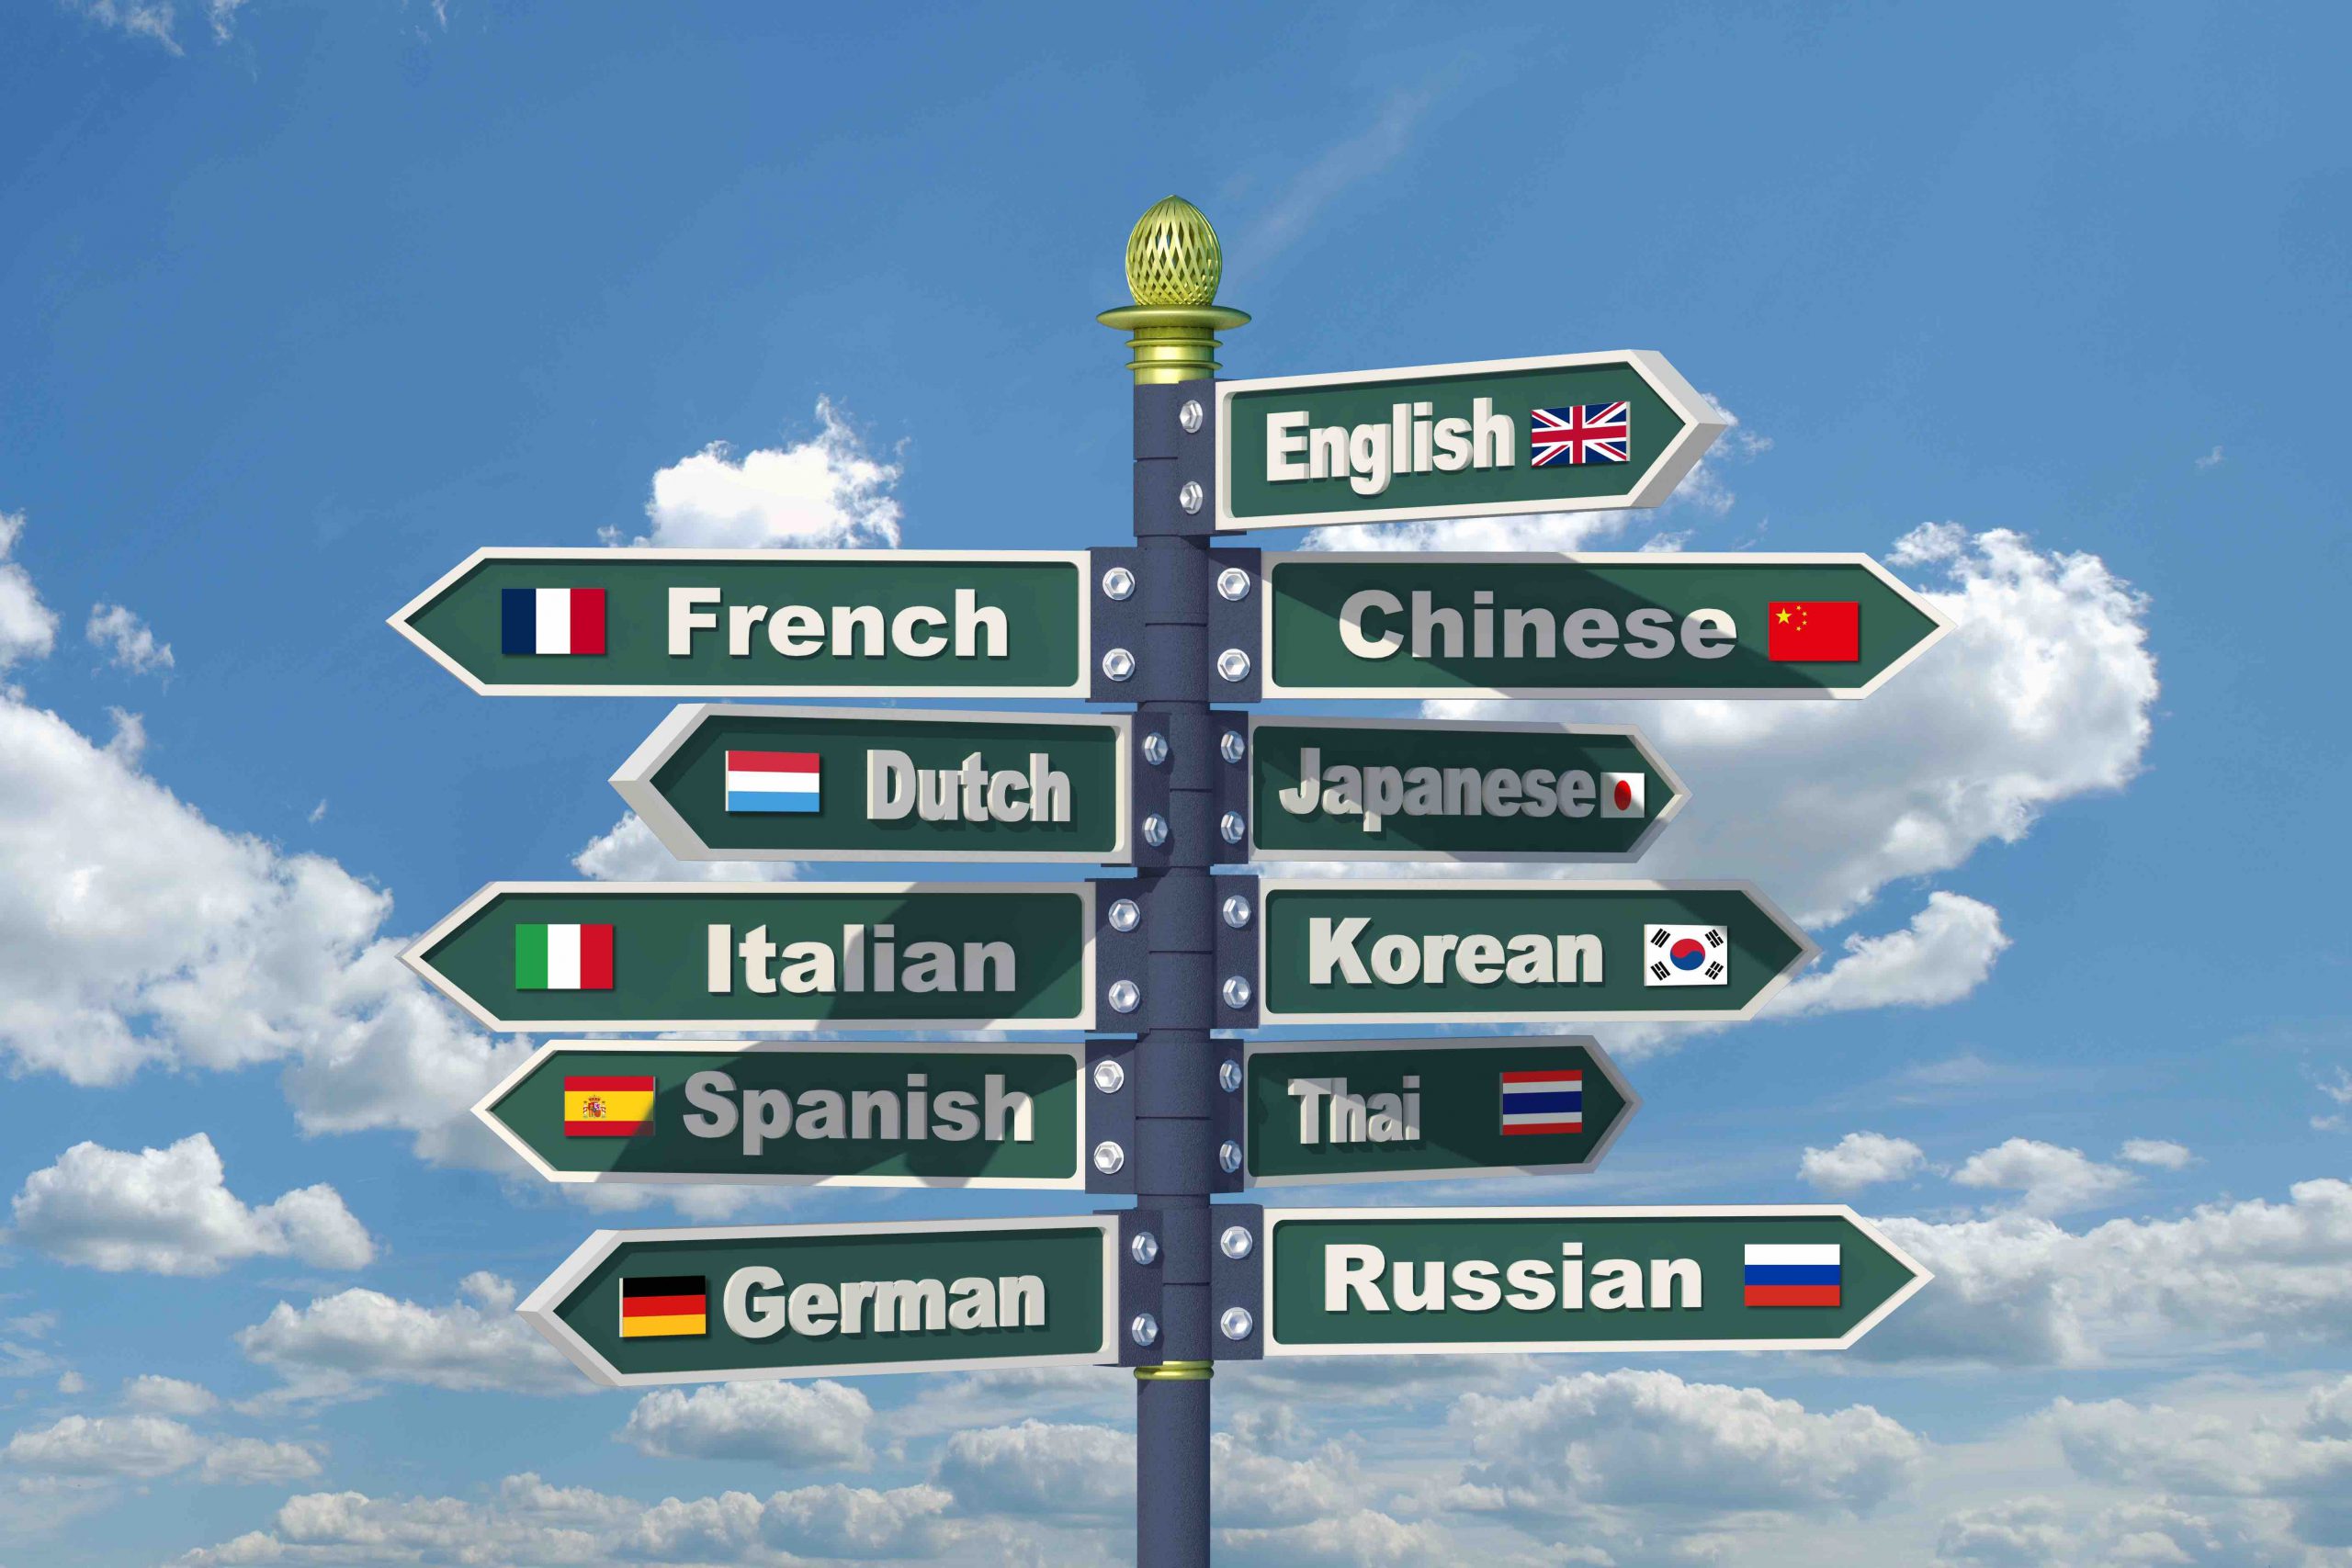 6 Things to Consider When Choosing a Language Service Provider